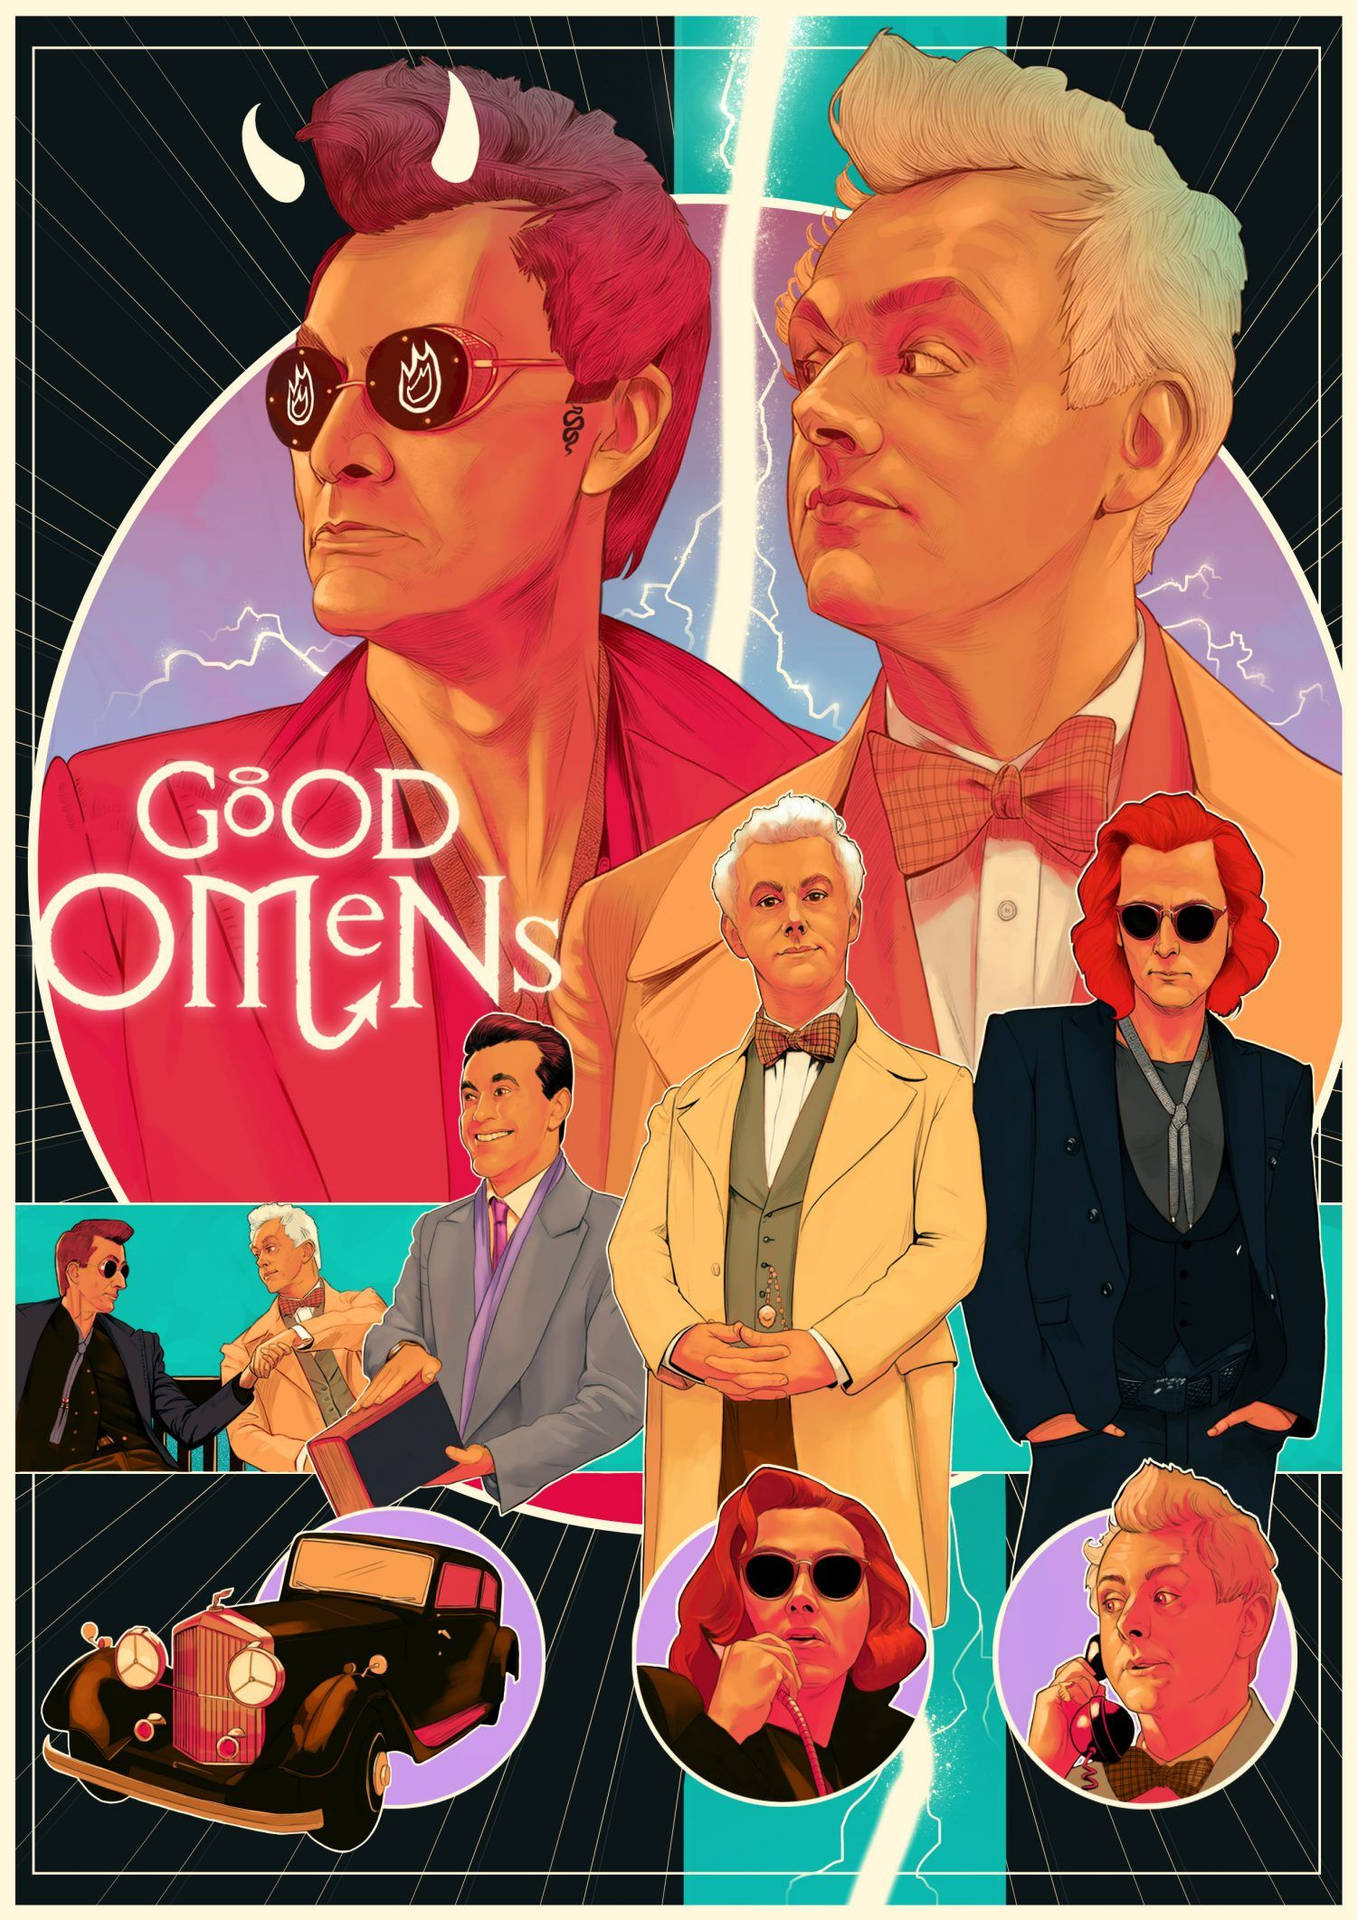 Good Omens Creative Poster